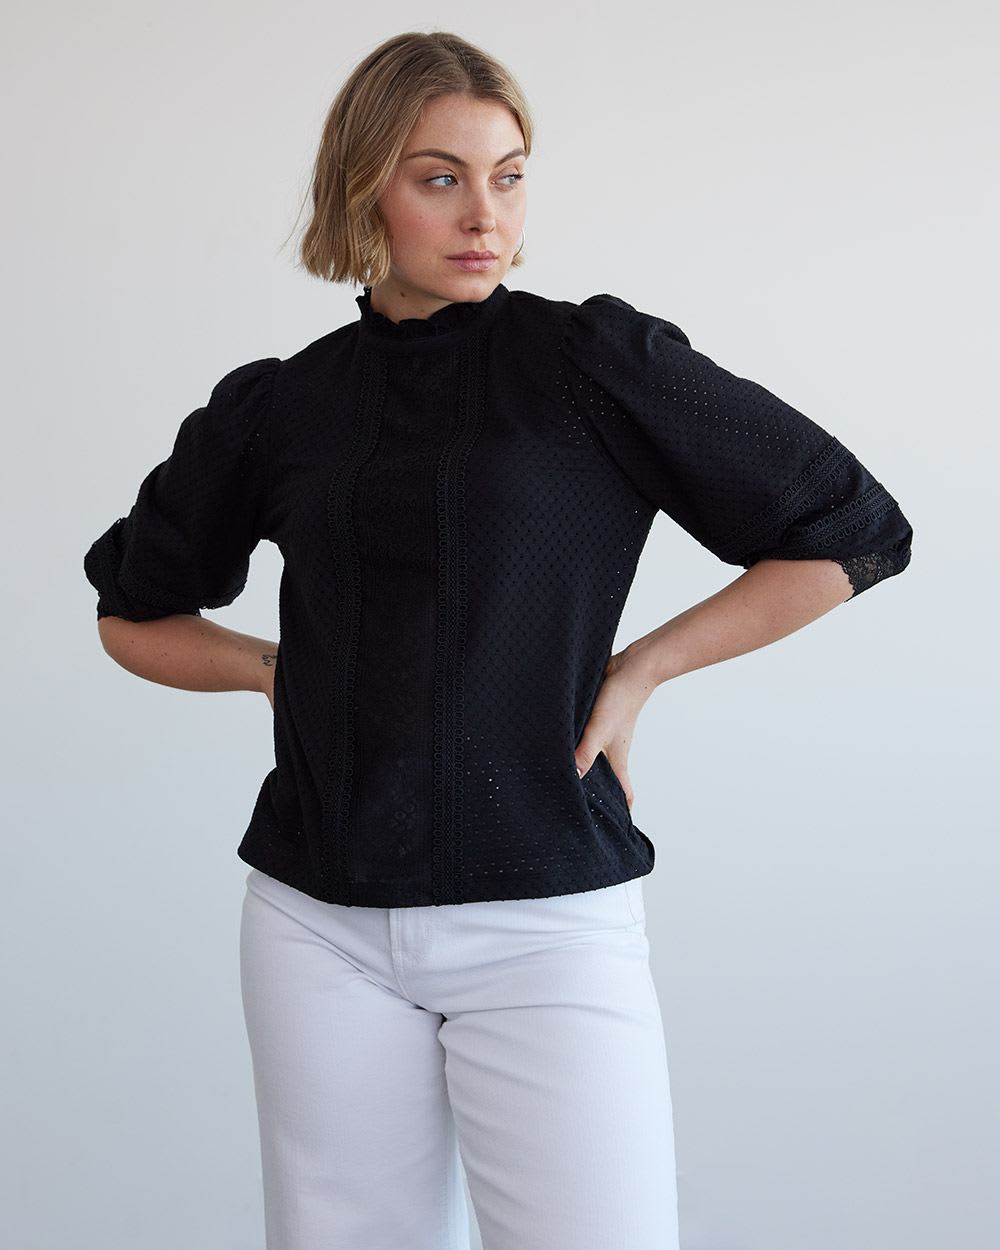 Puffy-Elbow-Sleeve Top with Mock Neckline